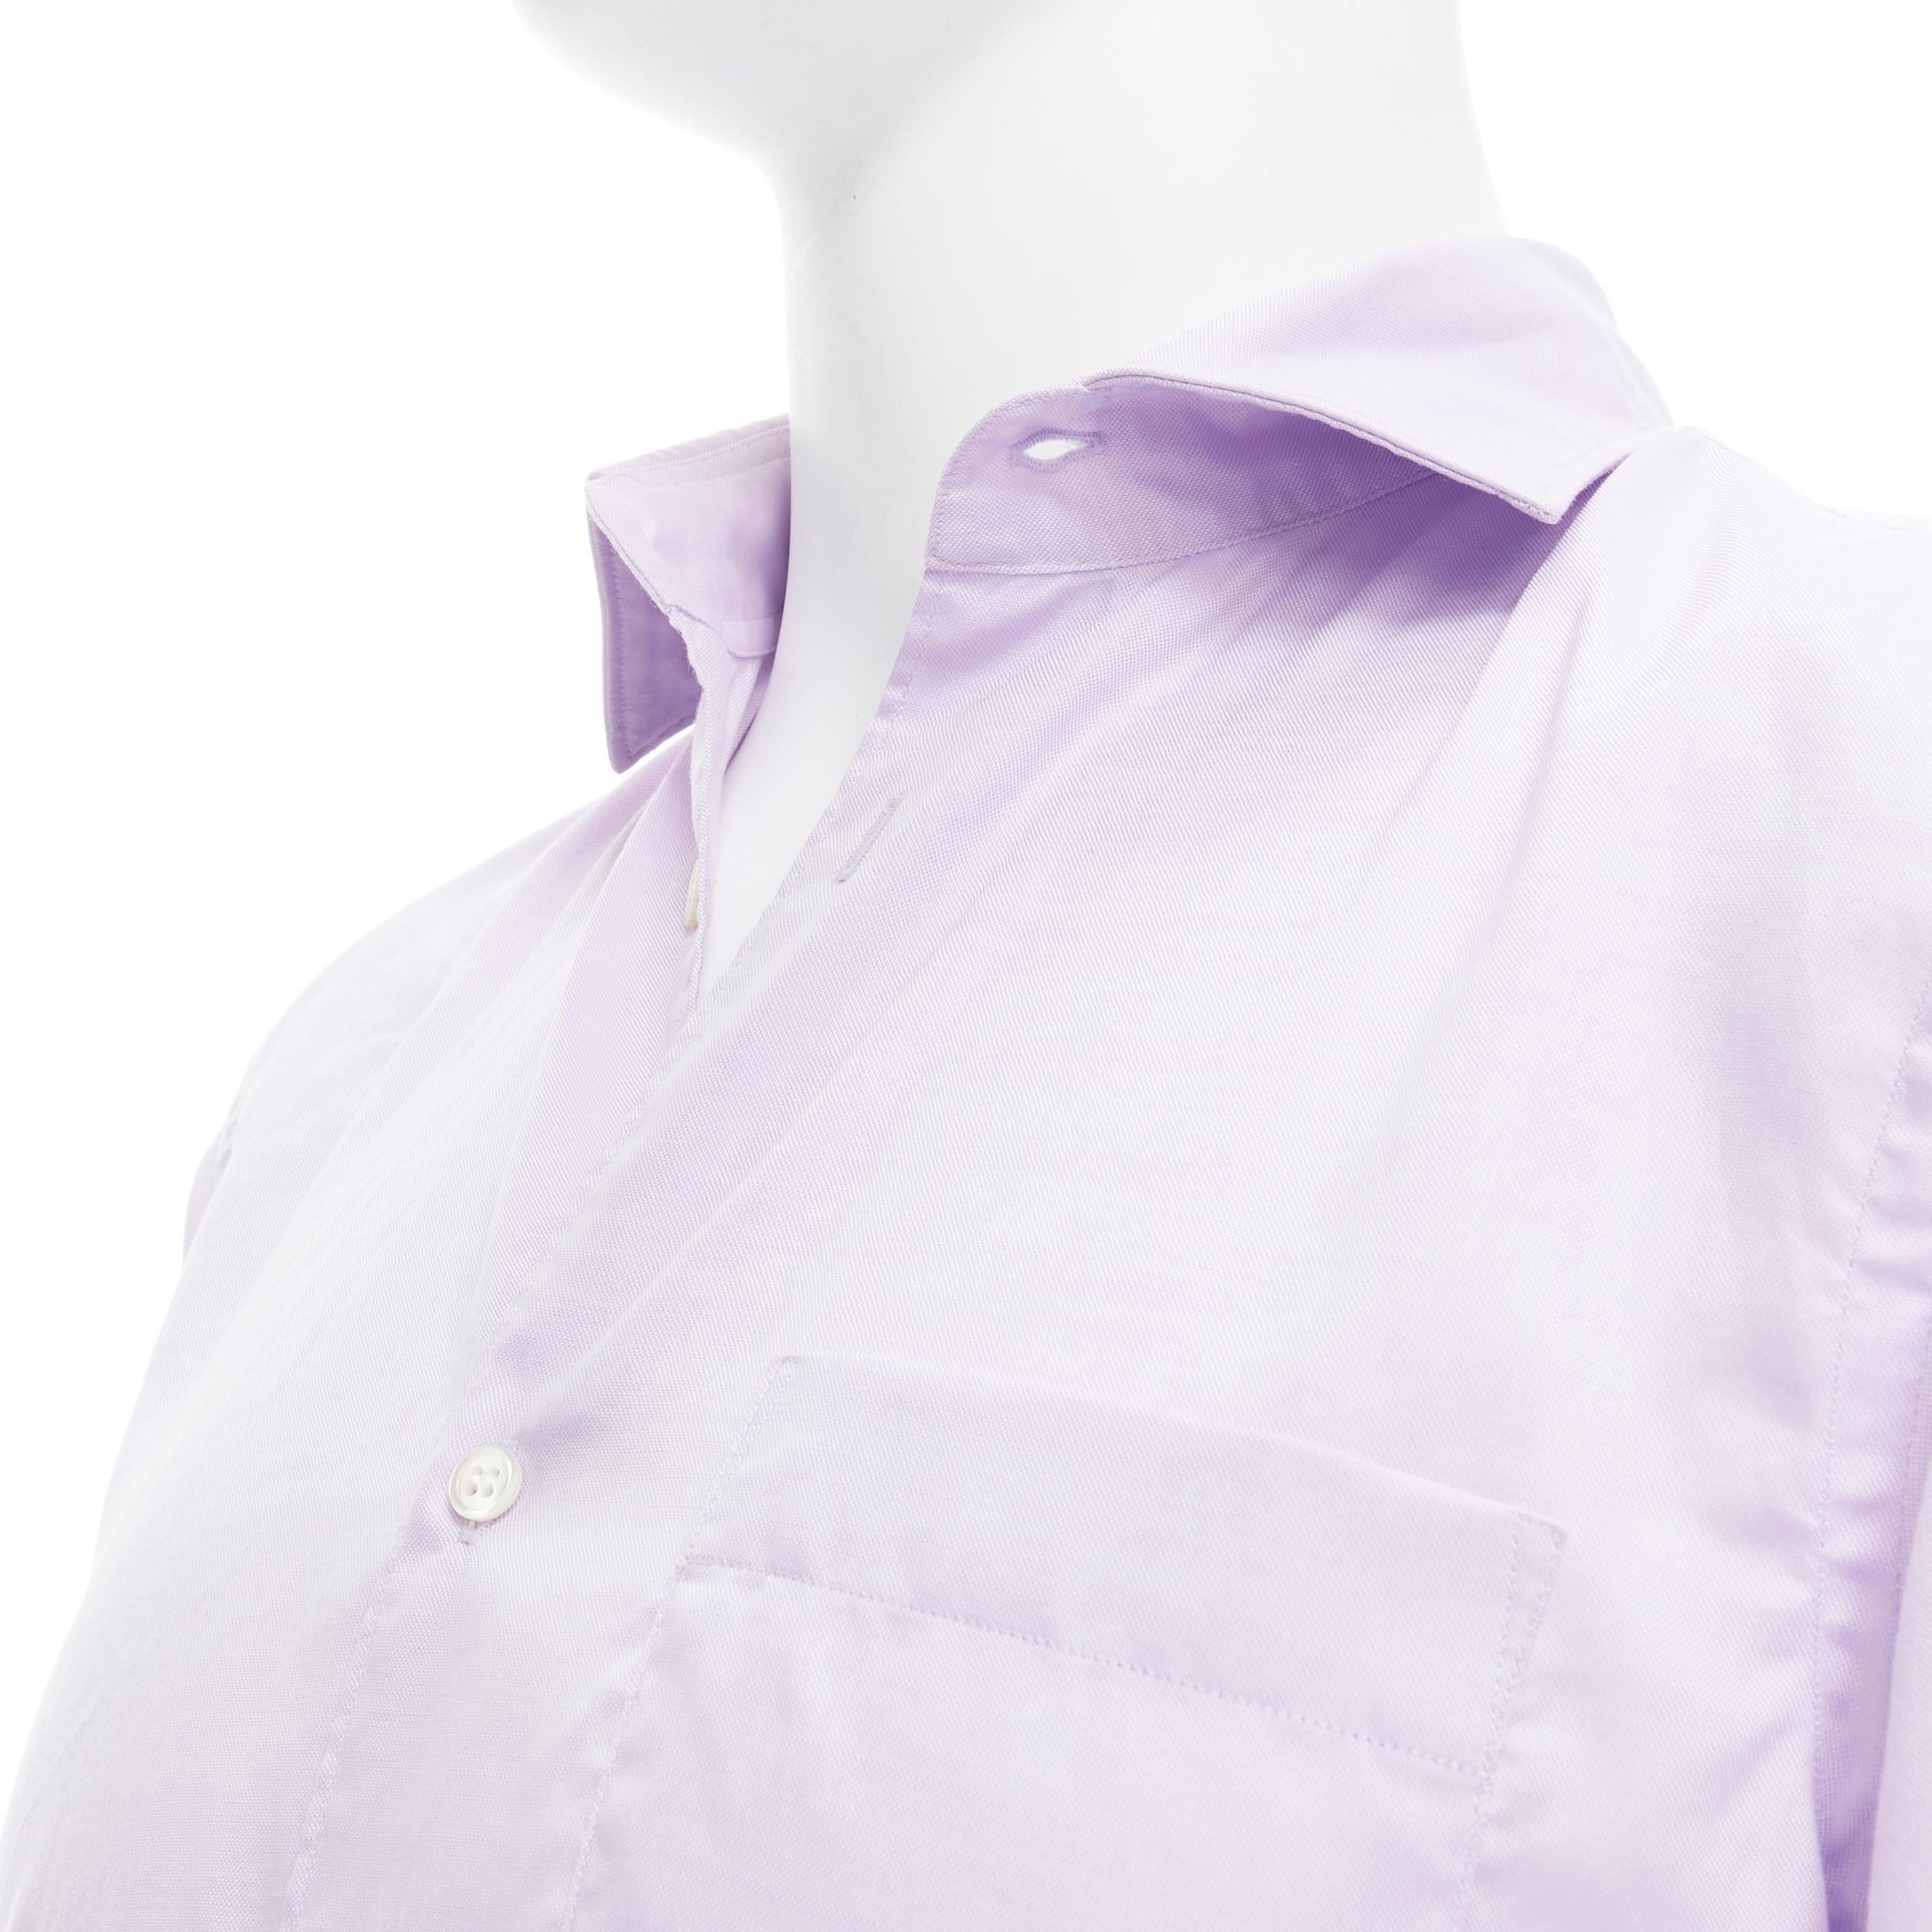 COMME DES GARCONS Homme Deux light purple cotton shirt S 
Reference: JNWG/A00029 
Brand: Comme des Garcons Homme Deux 
Material: Cotton 
Color: Purple 
Pattern: Solid 
Closure: Button 
Estimated Retail Price: US $540 
Made in: Japan 

CONDITION: